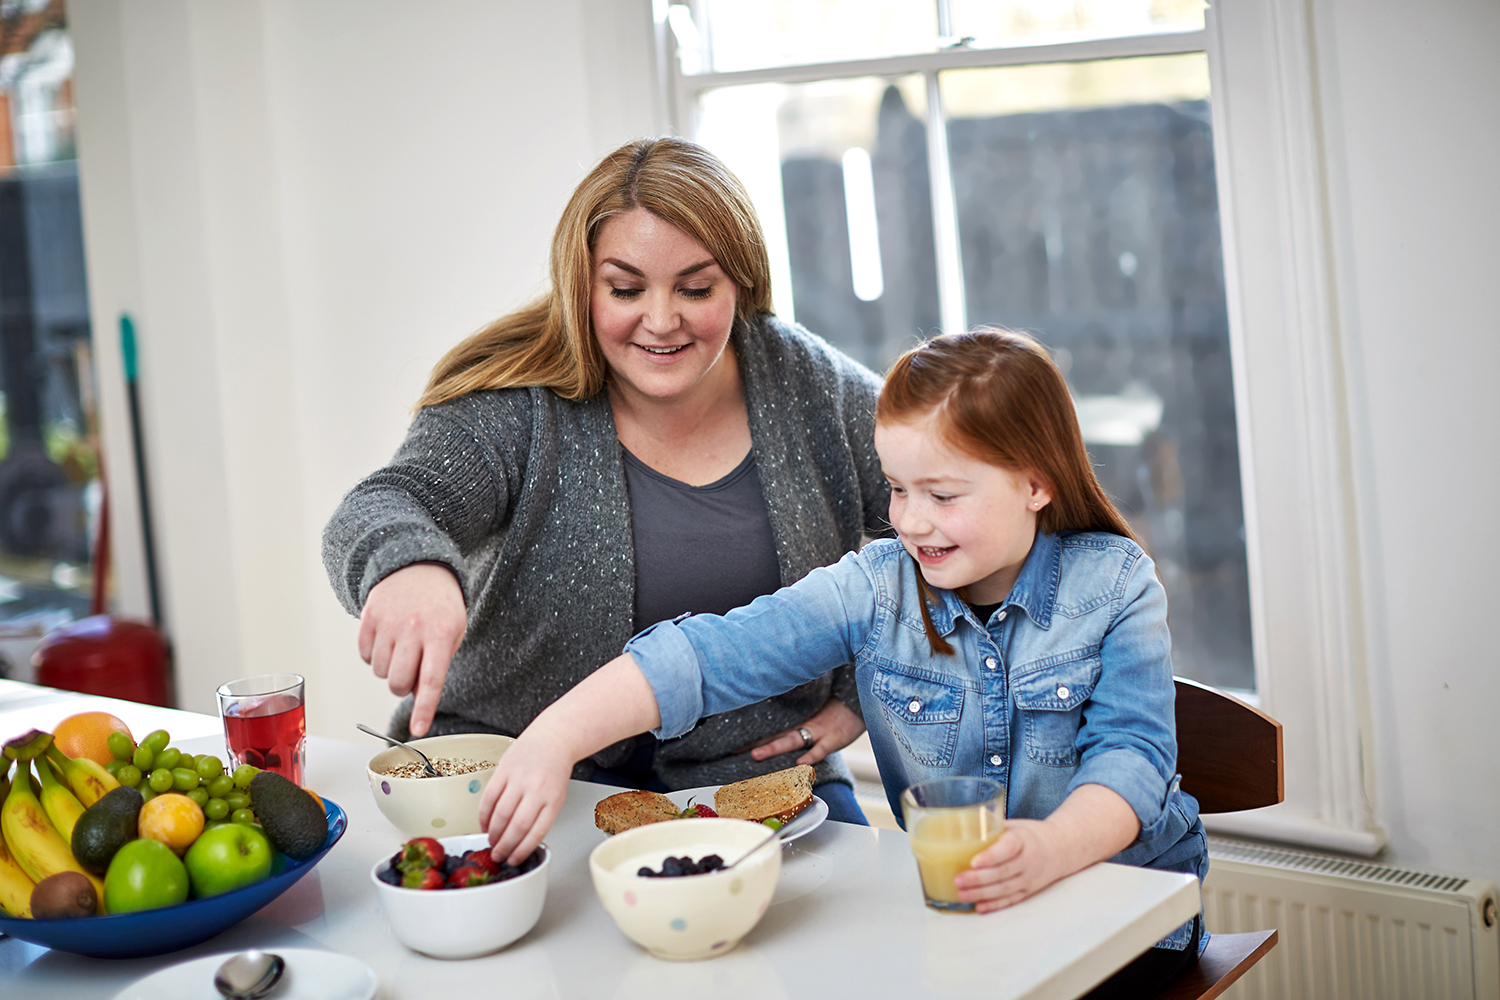 Obesity Awareness: How can the parents support their children?